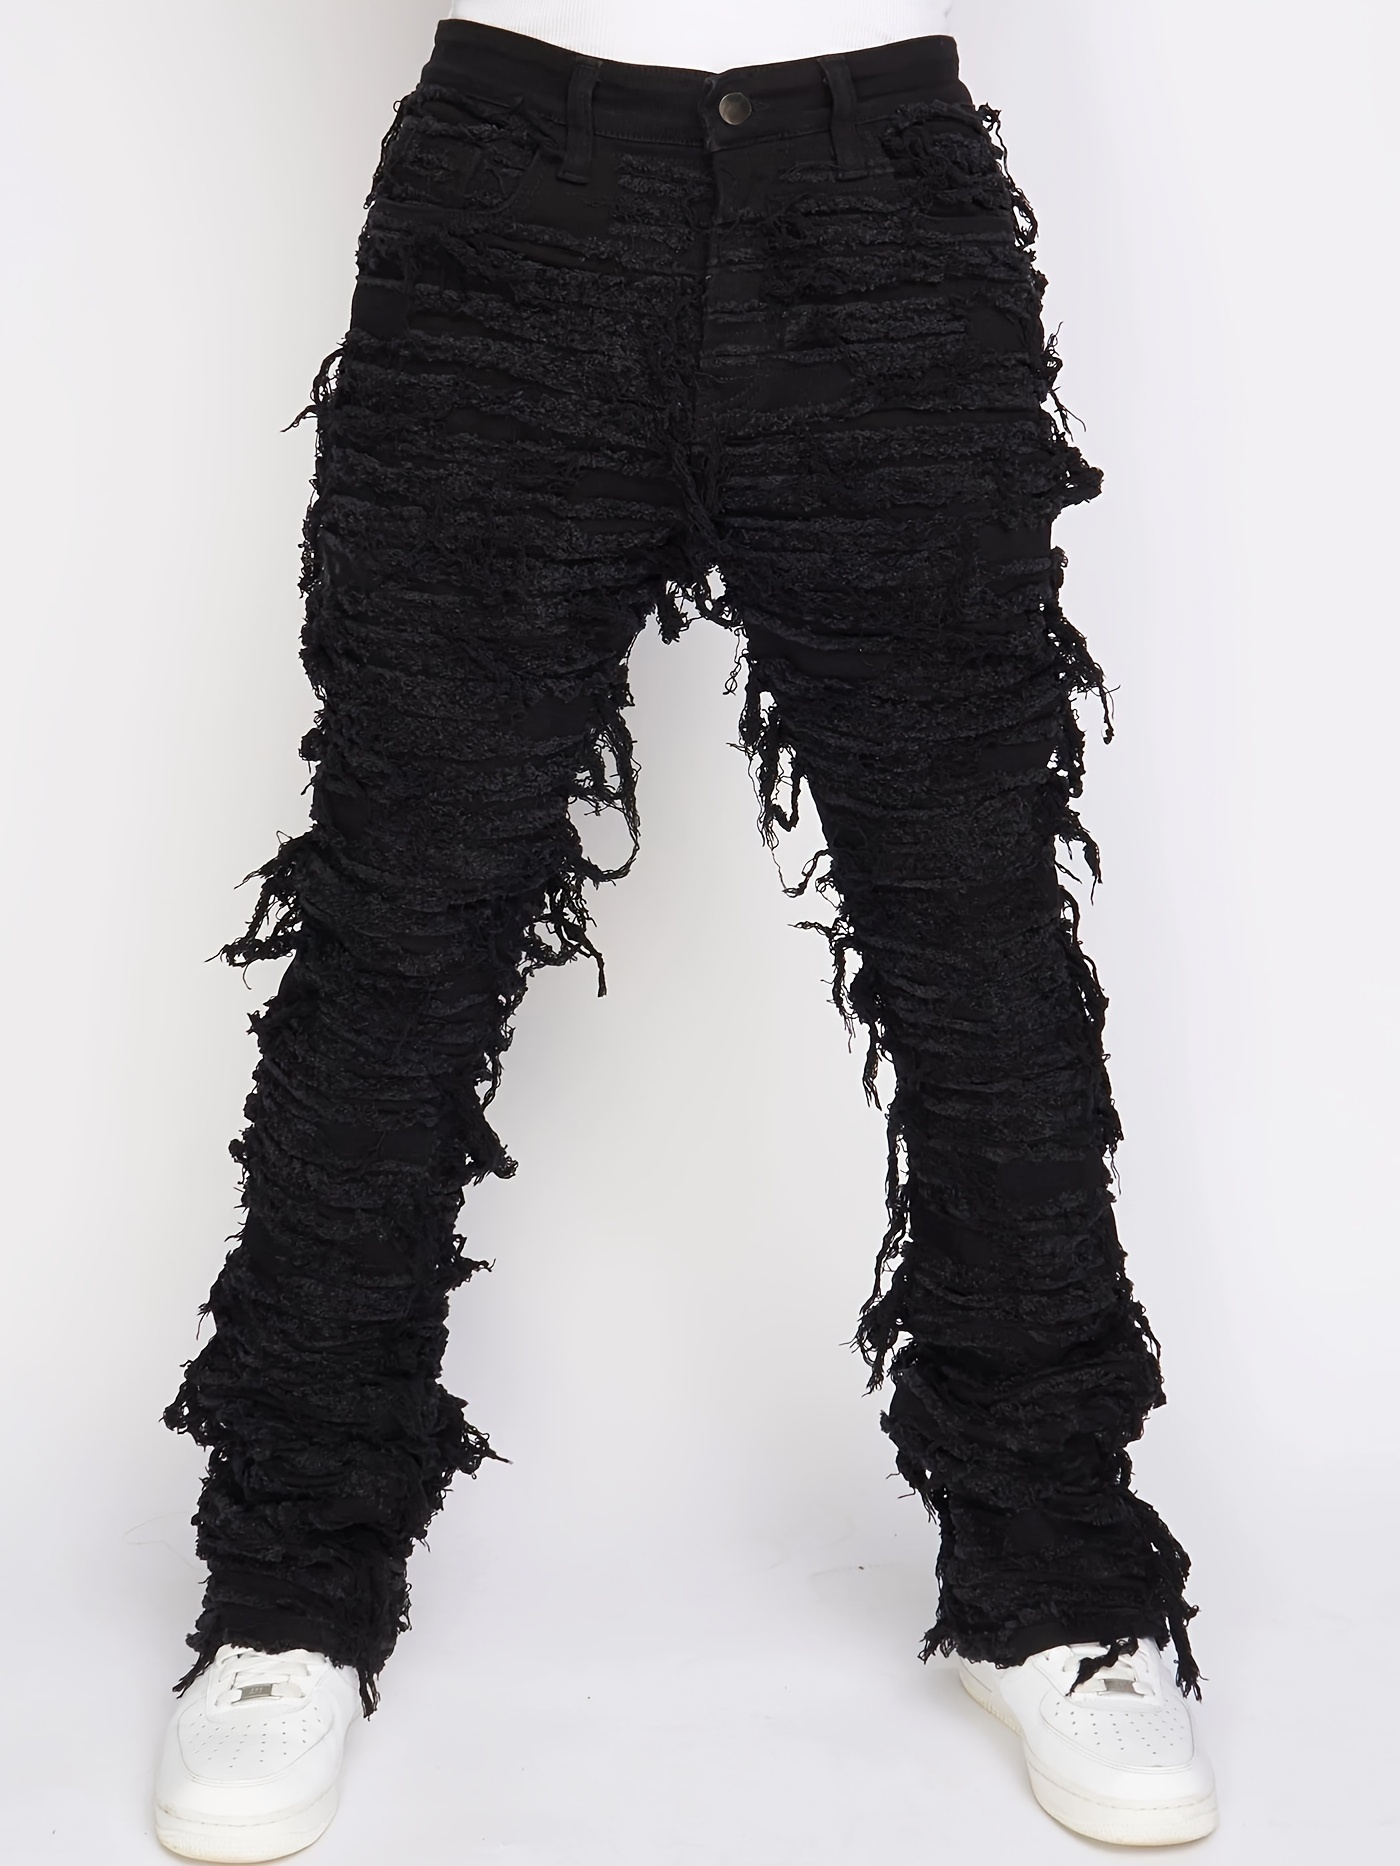 Men's Gothic/Heavy Metal/Punk Jeans (The Skavenger) – Boomers are Punk too